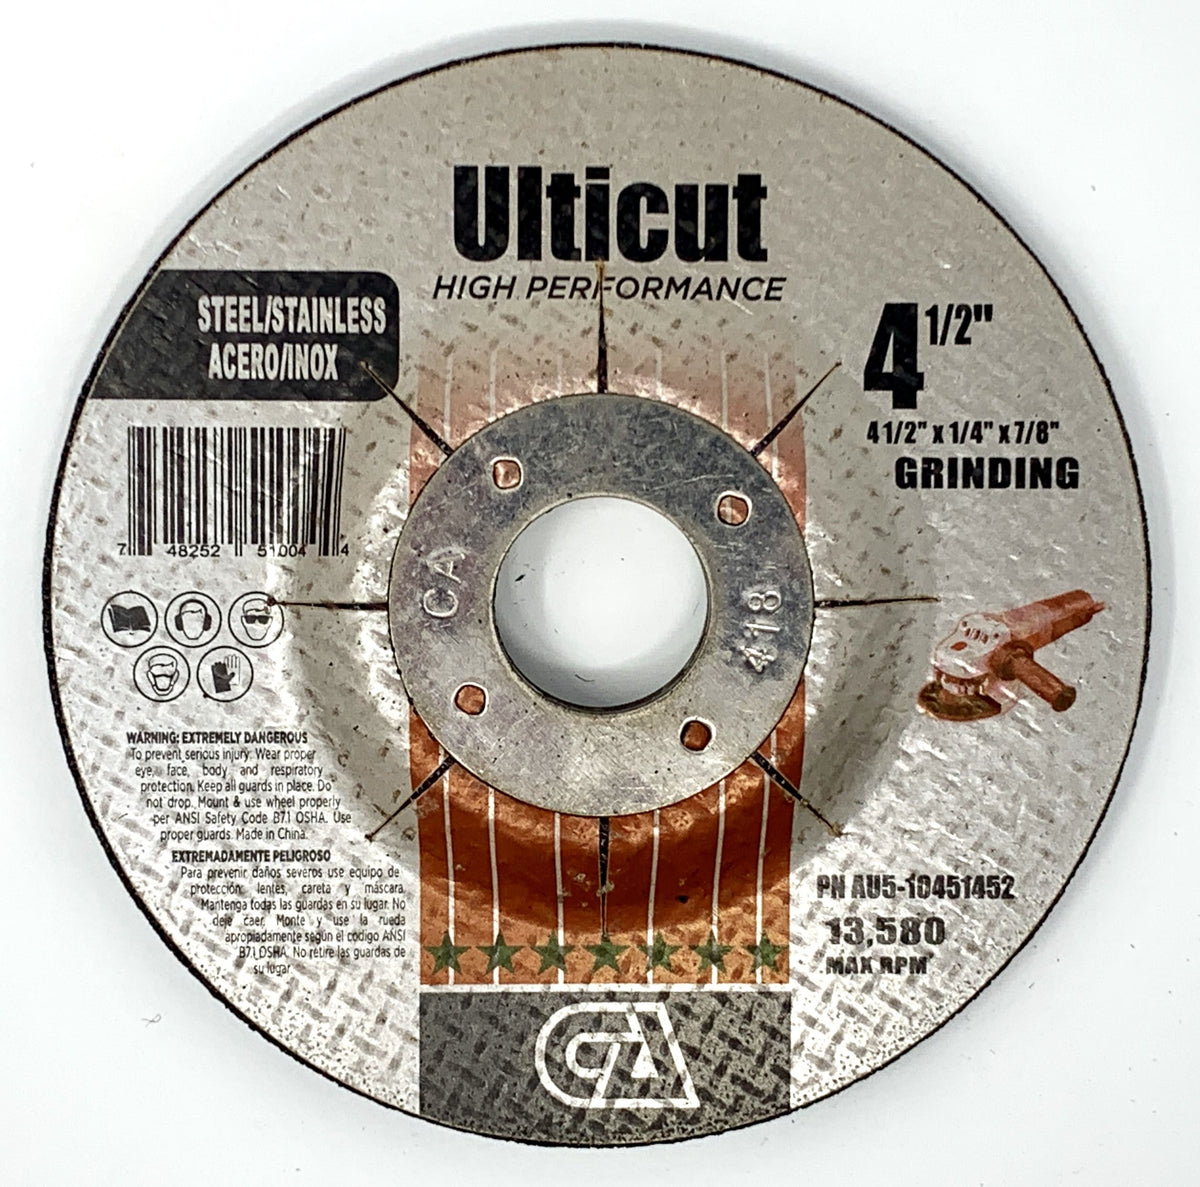 4 1/2" x 1/4" x 7/8" Type 27 Cutting & Grinding Wheels (Pack of 25)